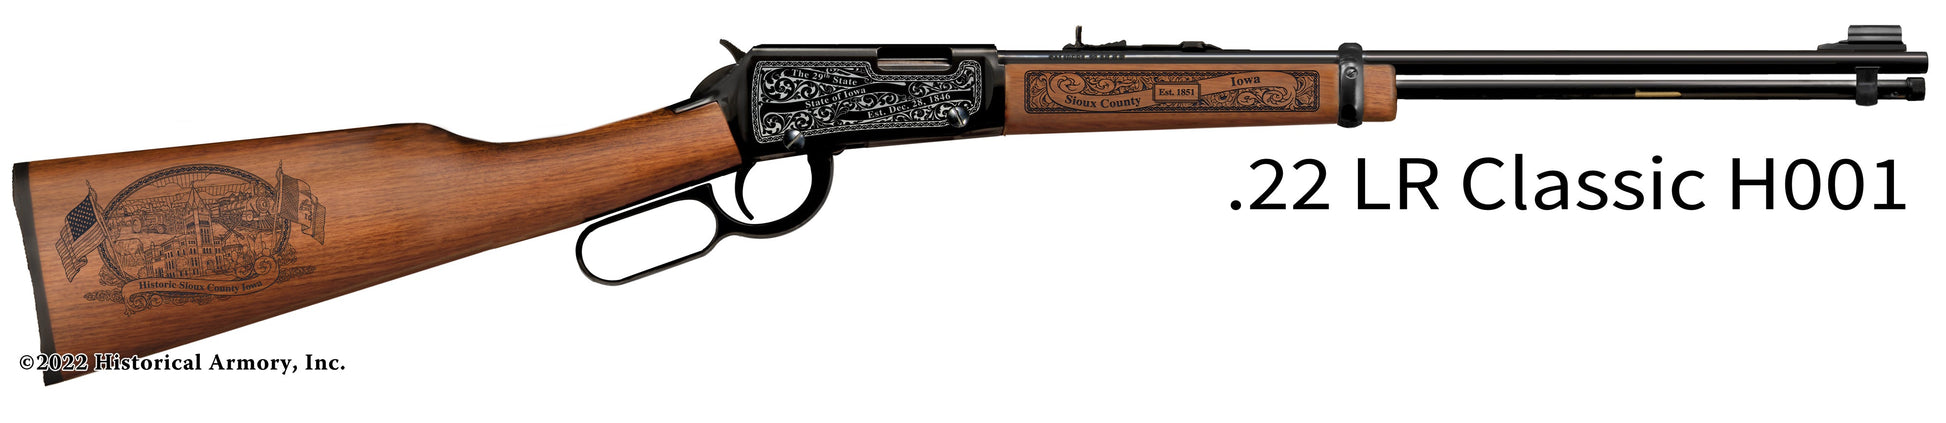 Sioux County Iowa Engraved Henry H001 Rifle